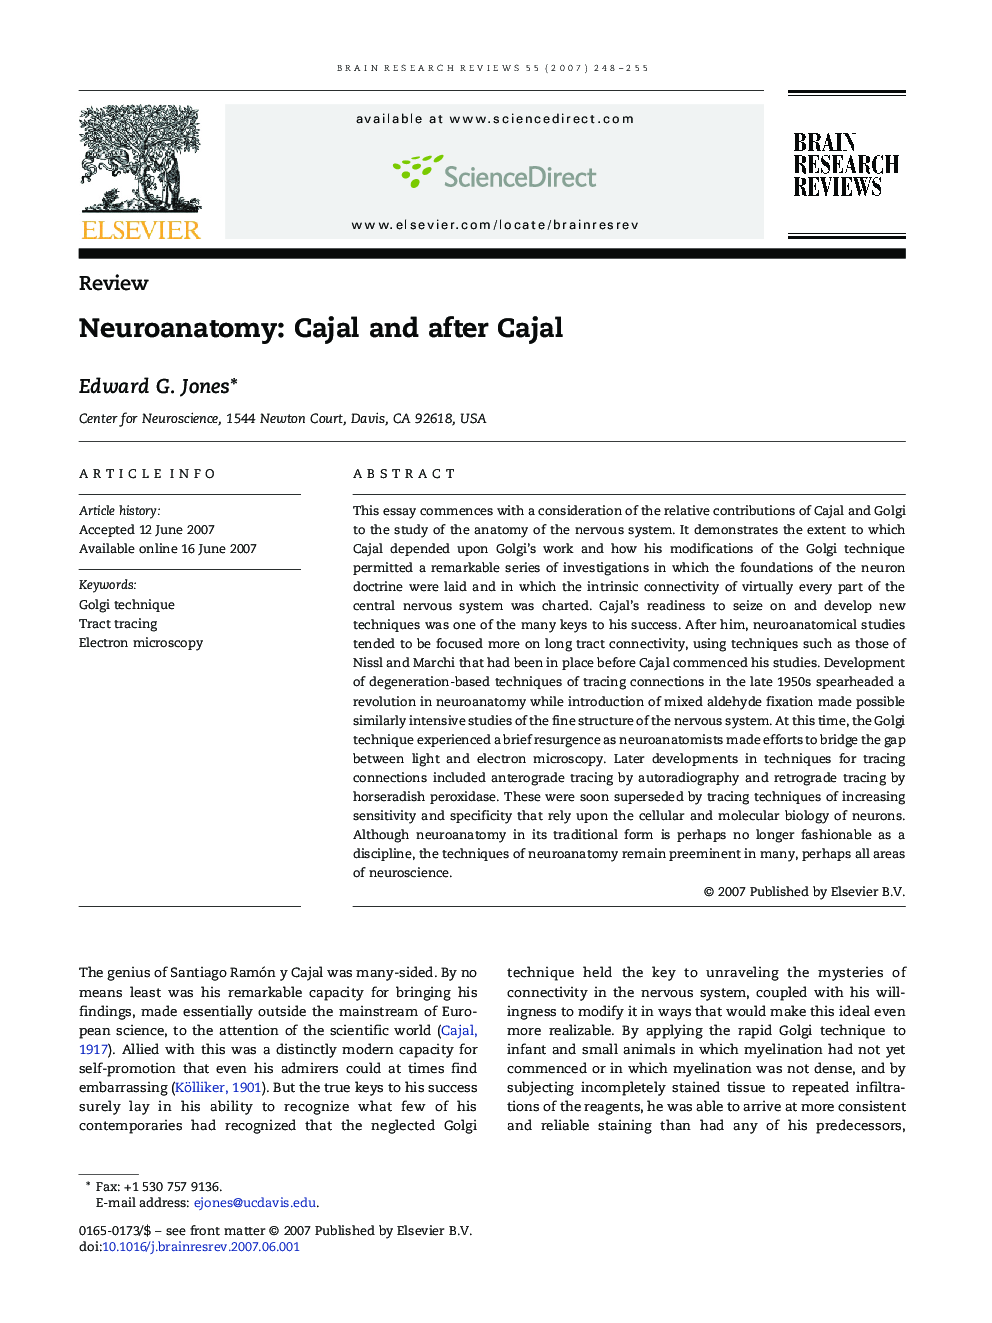 Neuroanatomy: Cajal and after Cajal